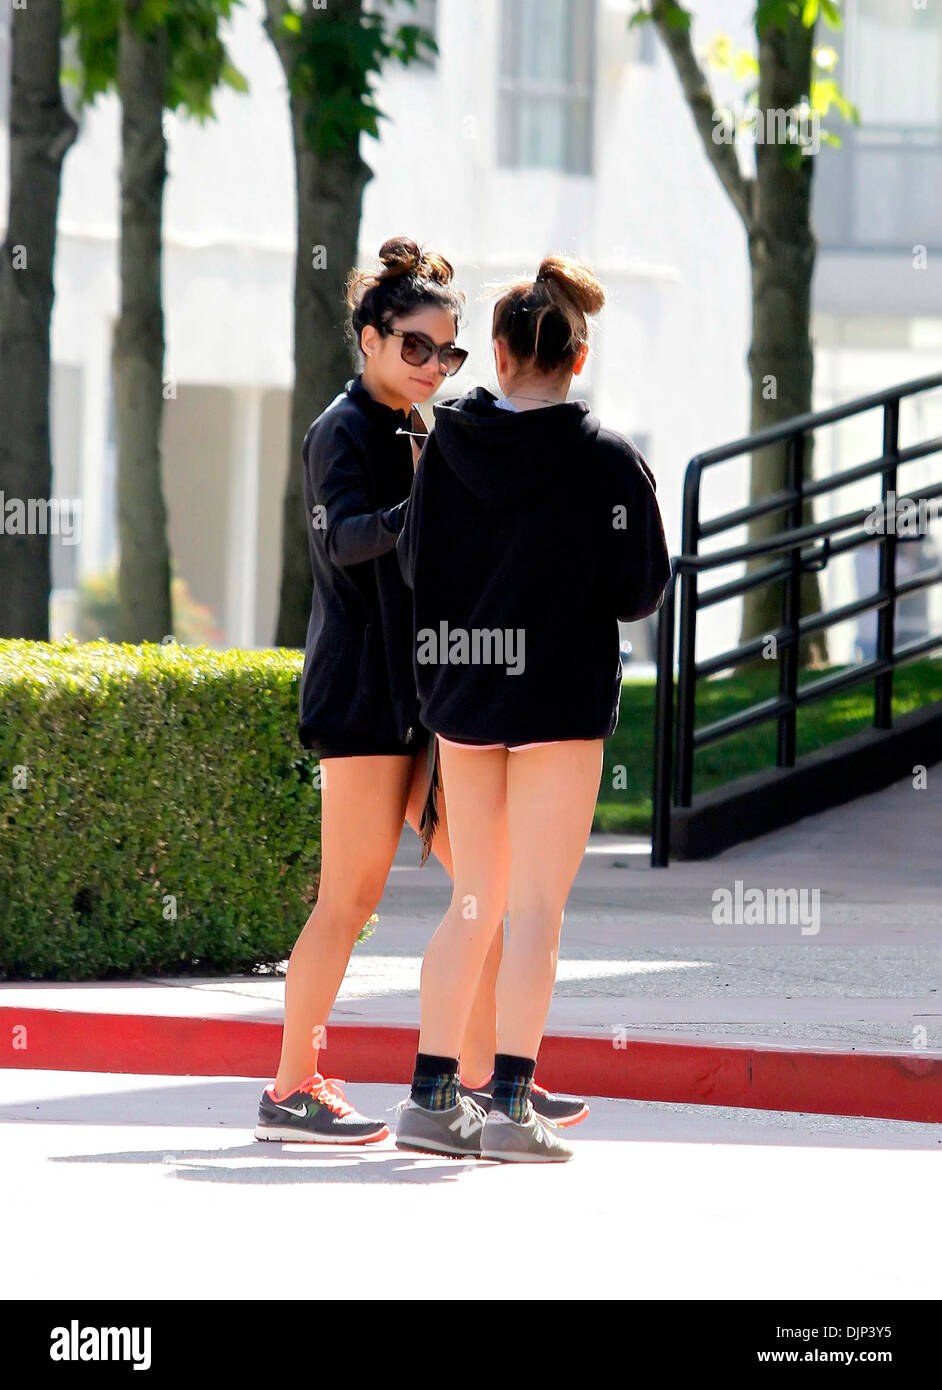 Vanessa Hudgens and Stella Hudgens Vanessa Hudgens dressed casually as she arrives at a gym with her sister Los Angeles Stock Photo